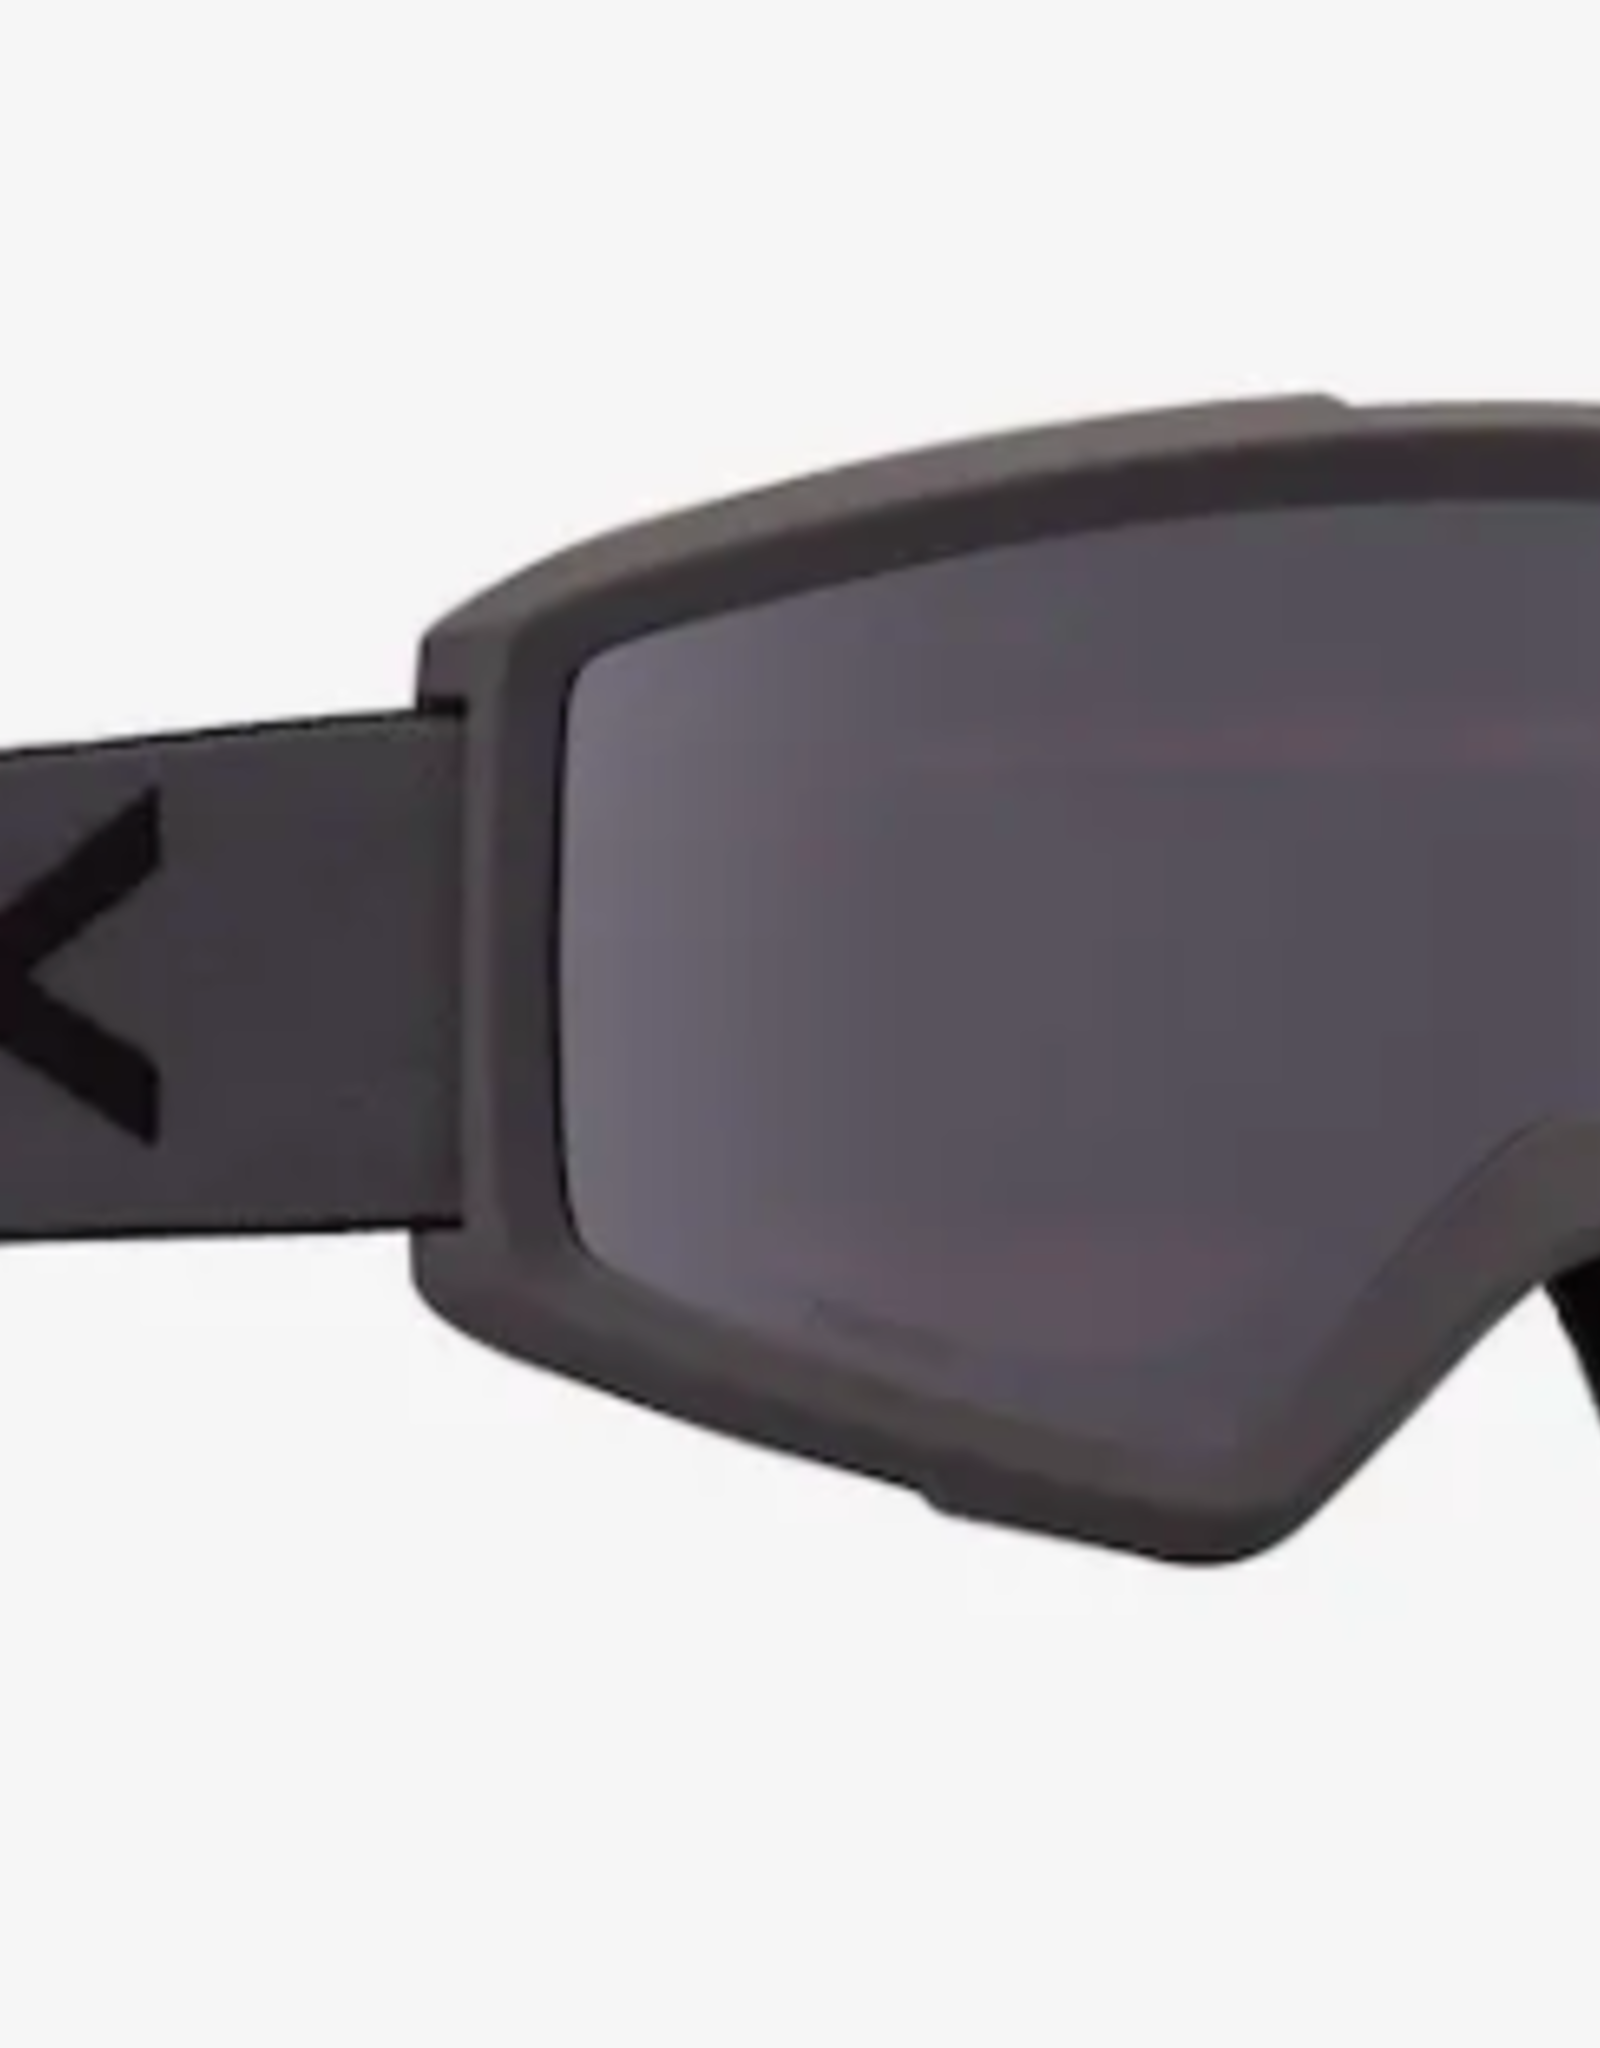 Anon Helix 2.0 Stealth Goggles+Perceive Sunny Onyx+Amber 2022